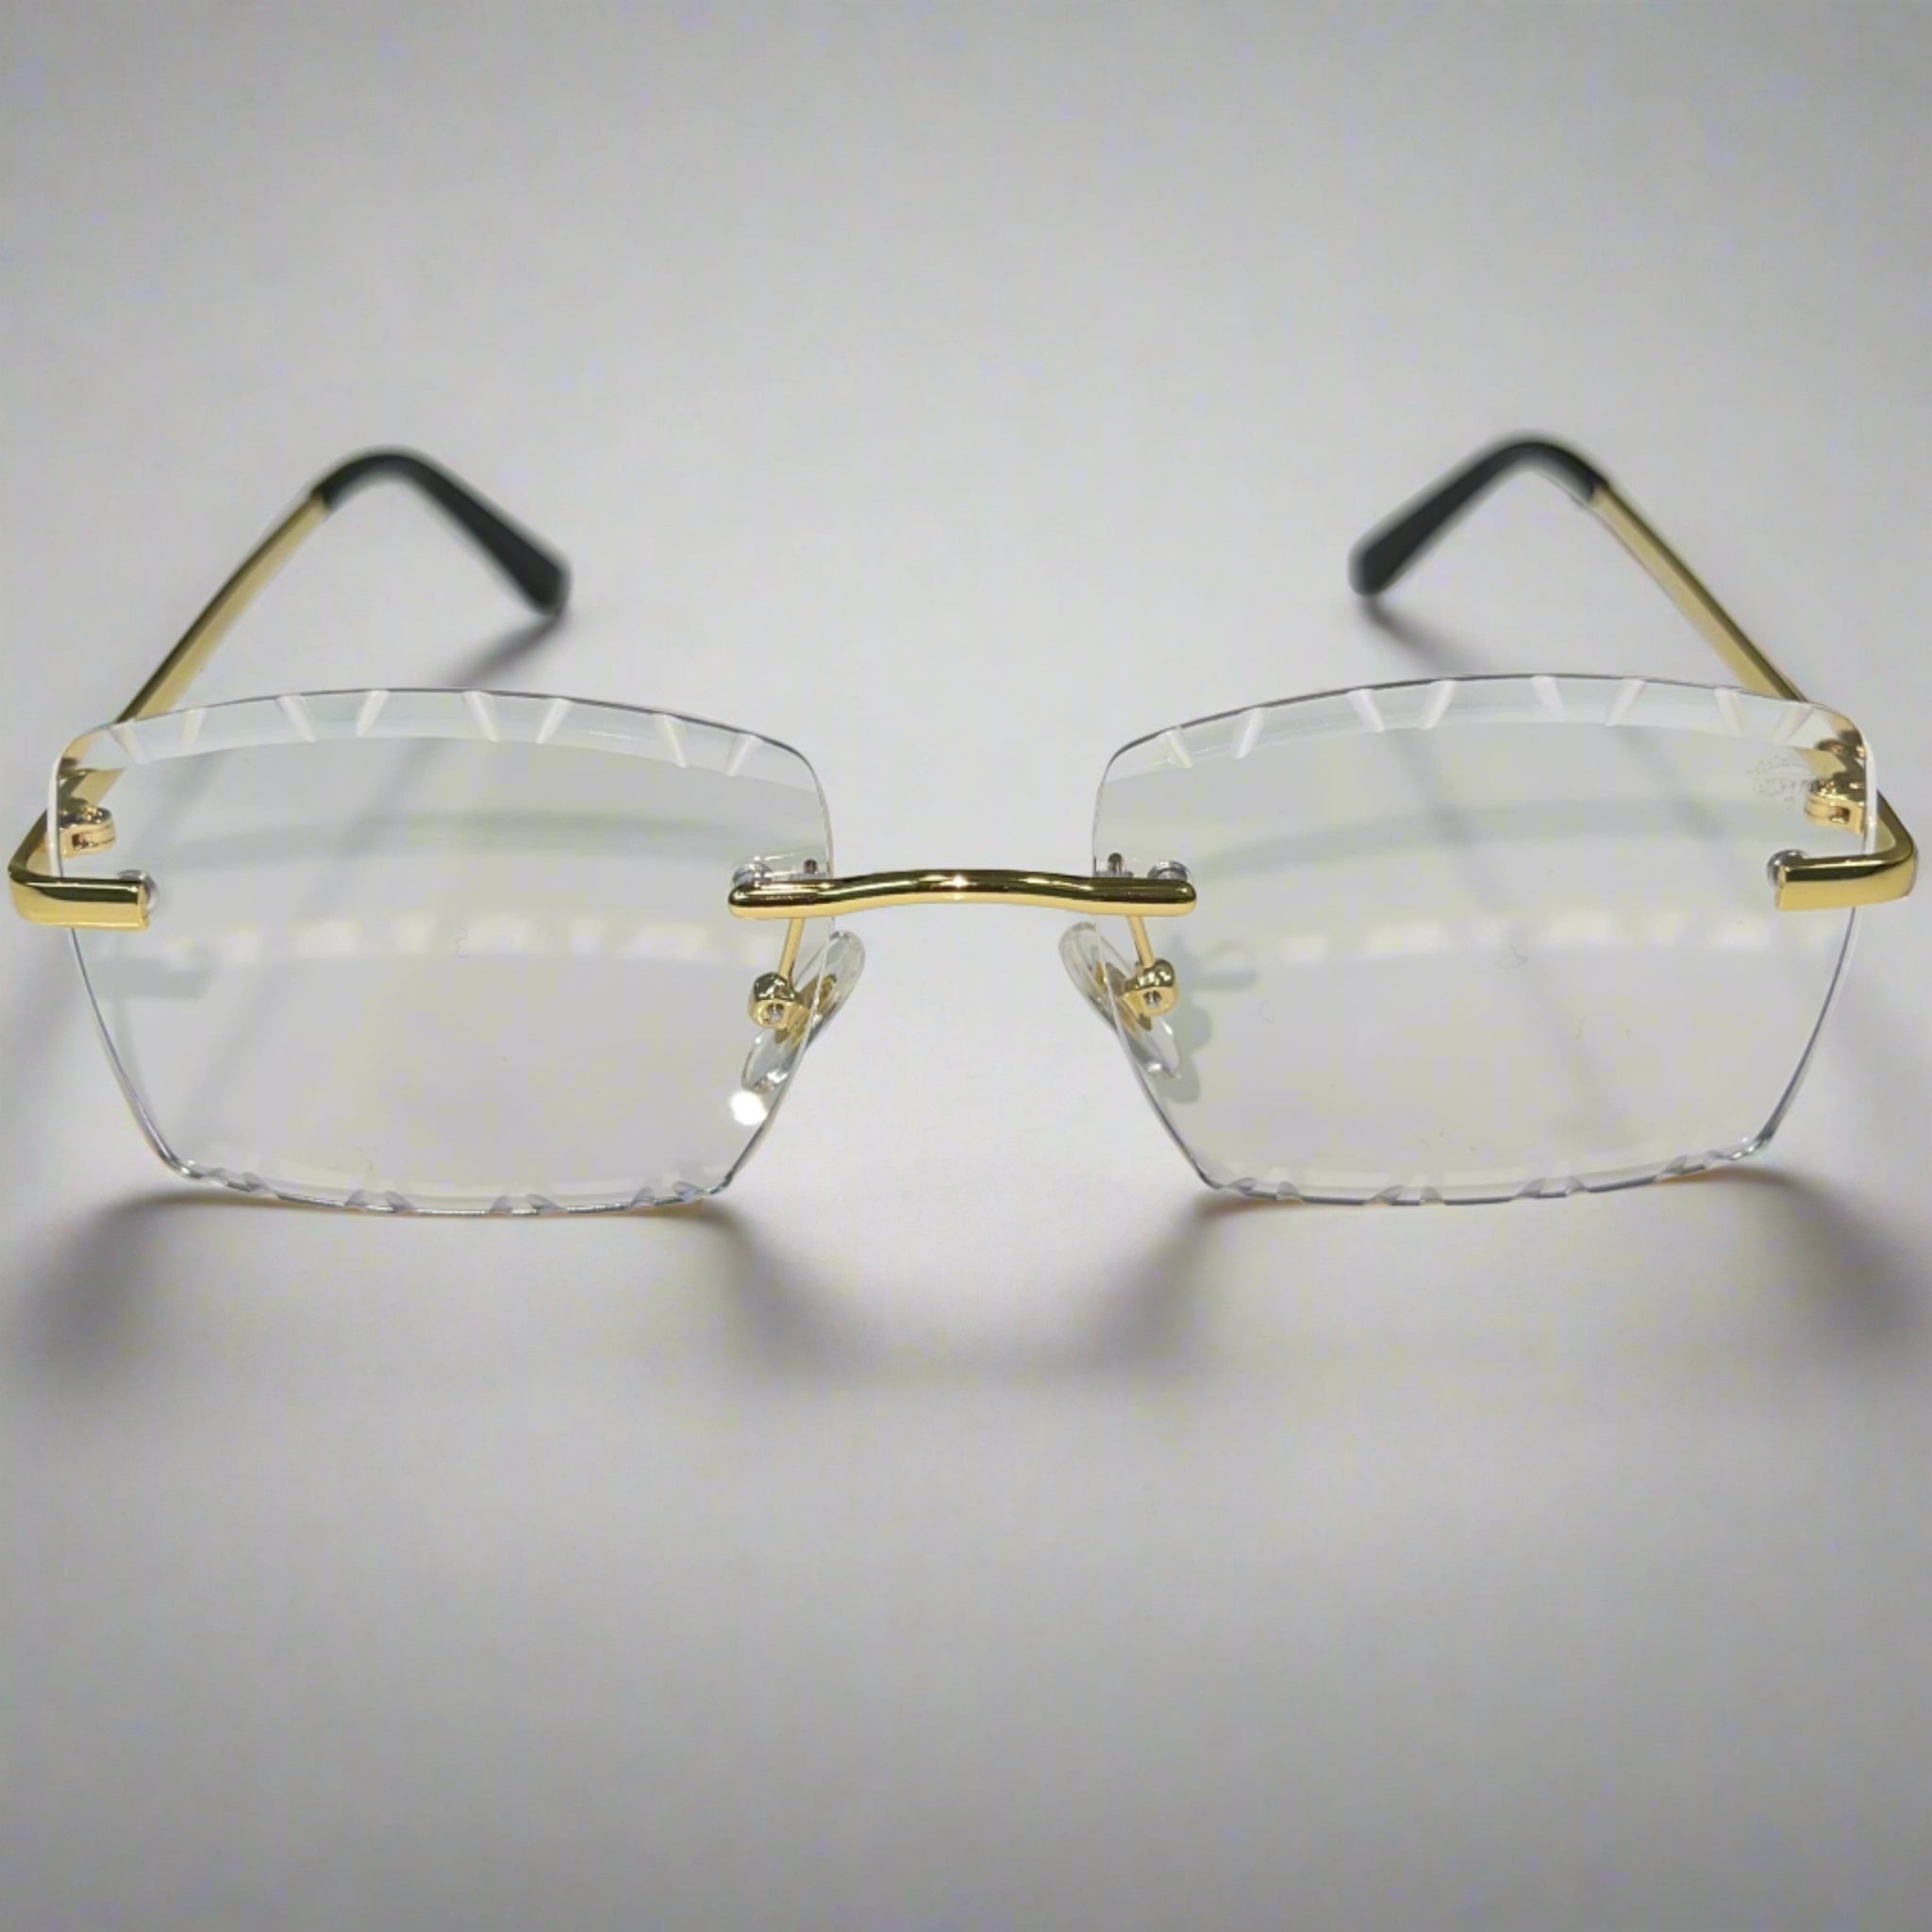 Dripcut Glasses - 14k gold plated - Transparent Shade - Sehgal Glasses